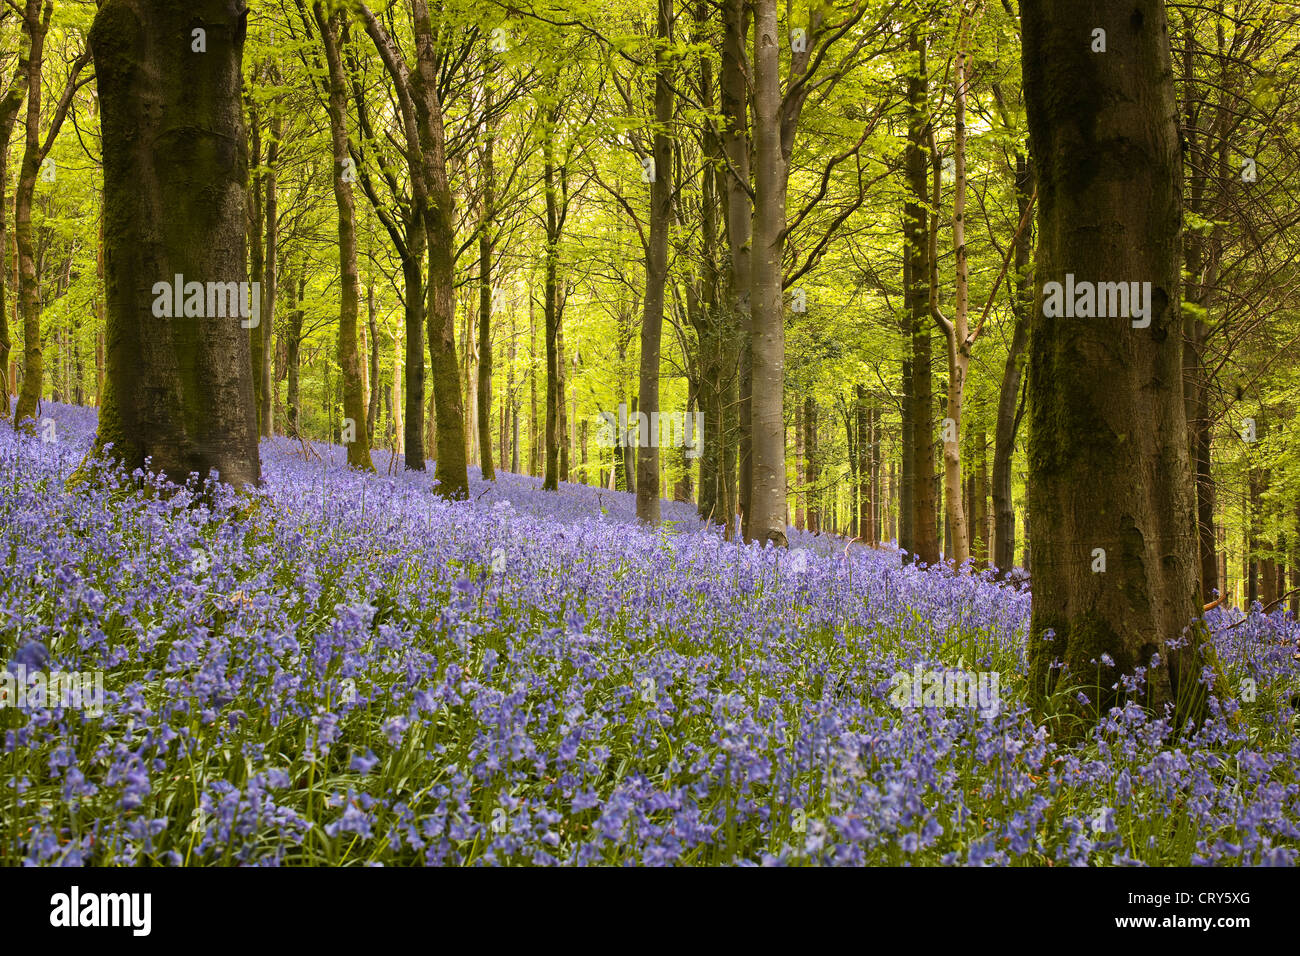 Delcombe Wood and a beautiful carpet of bluebells in Dorset, England, UK. Stock Photo